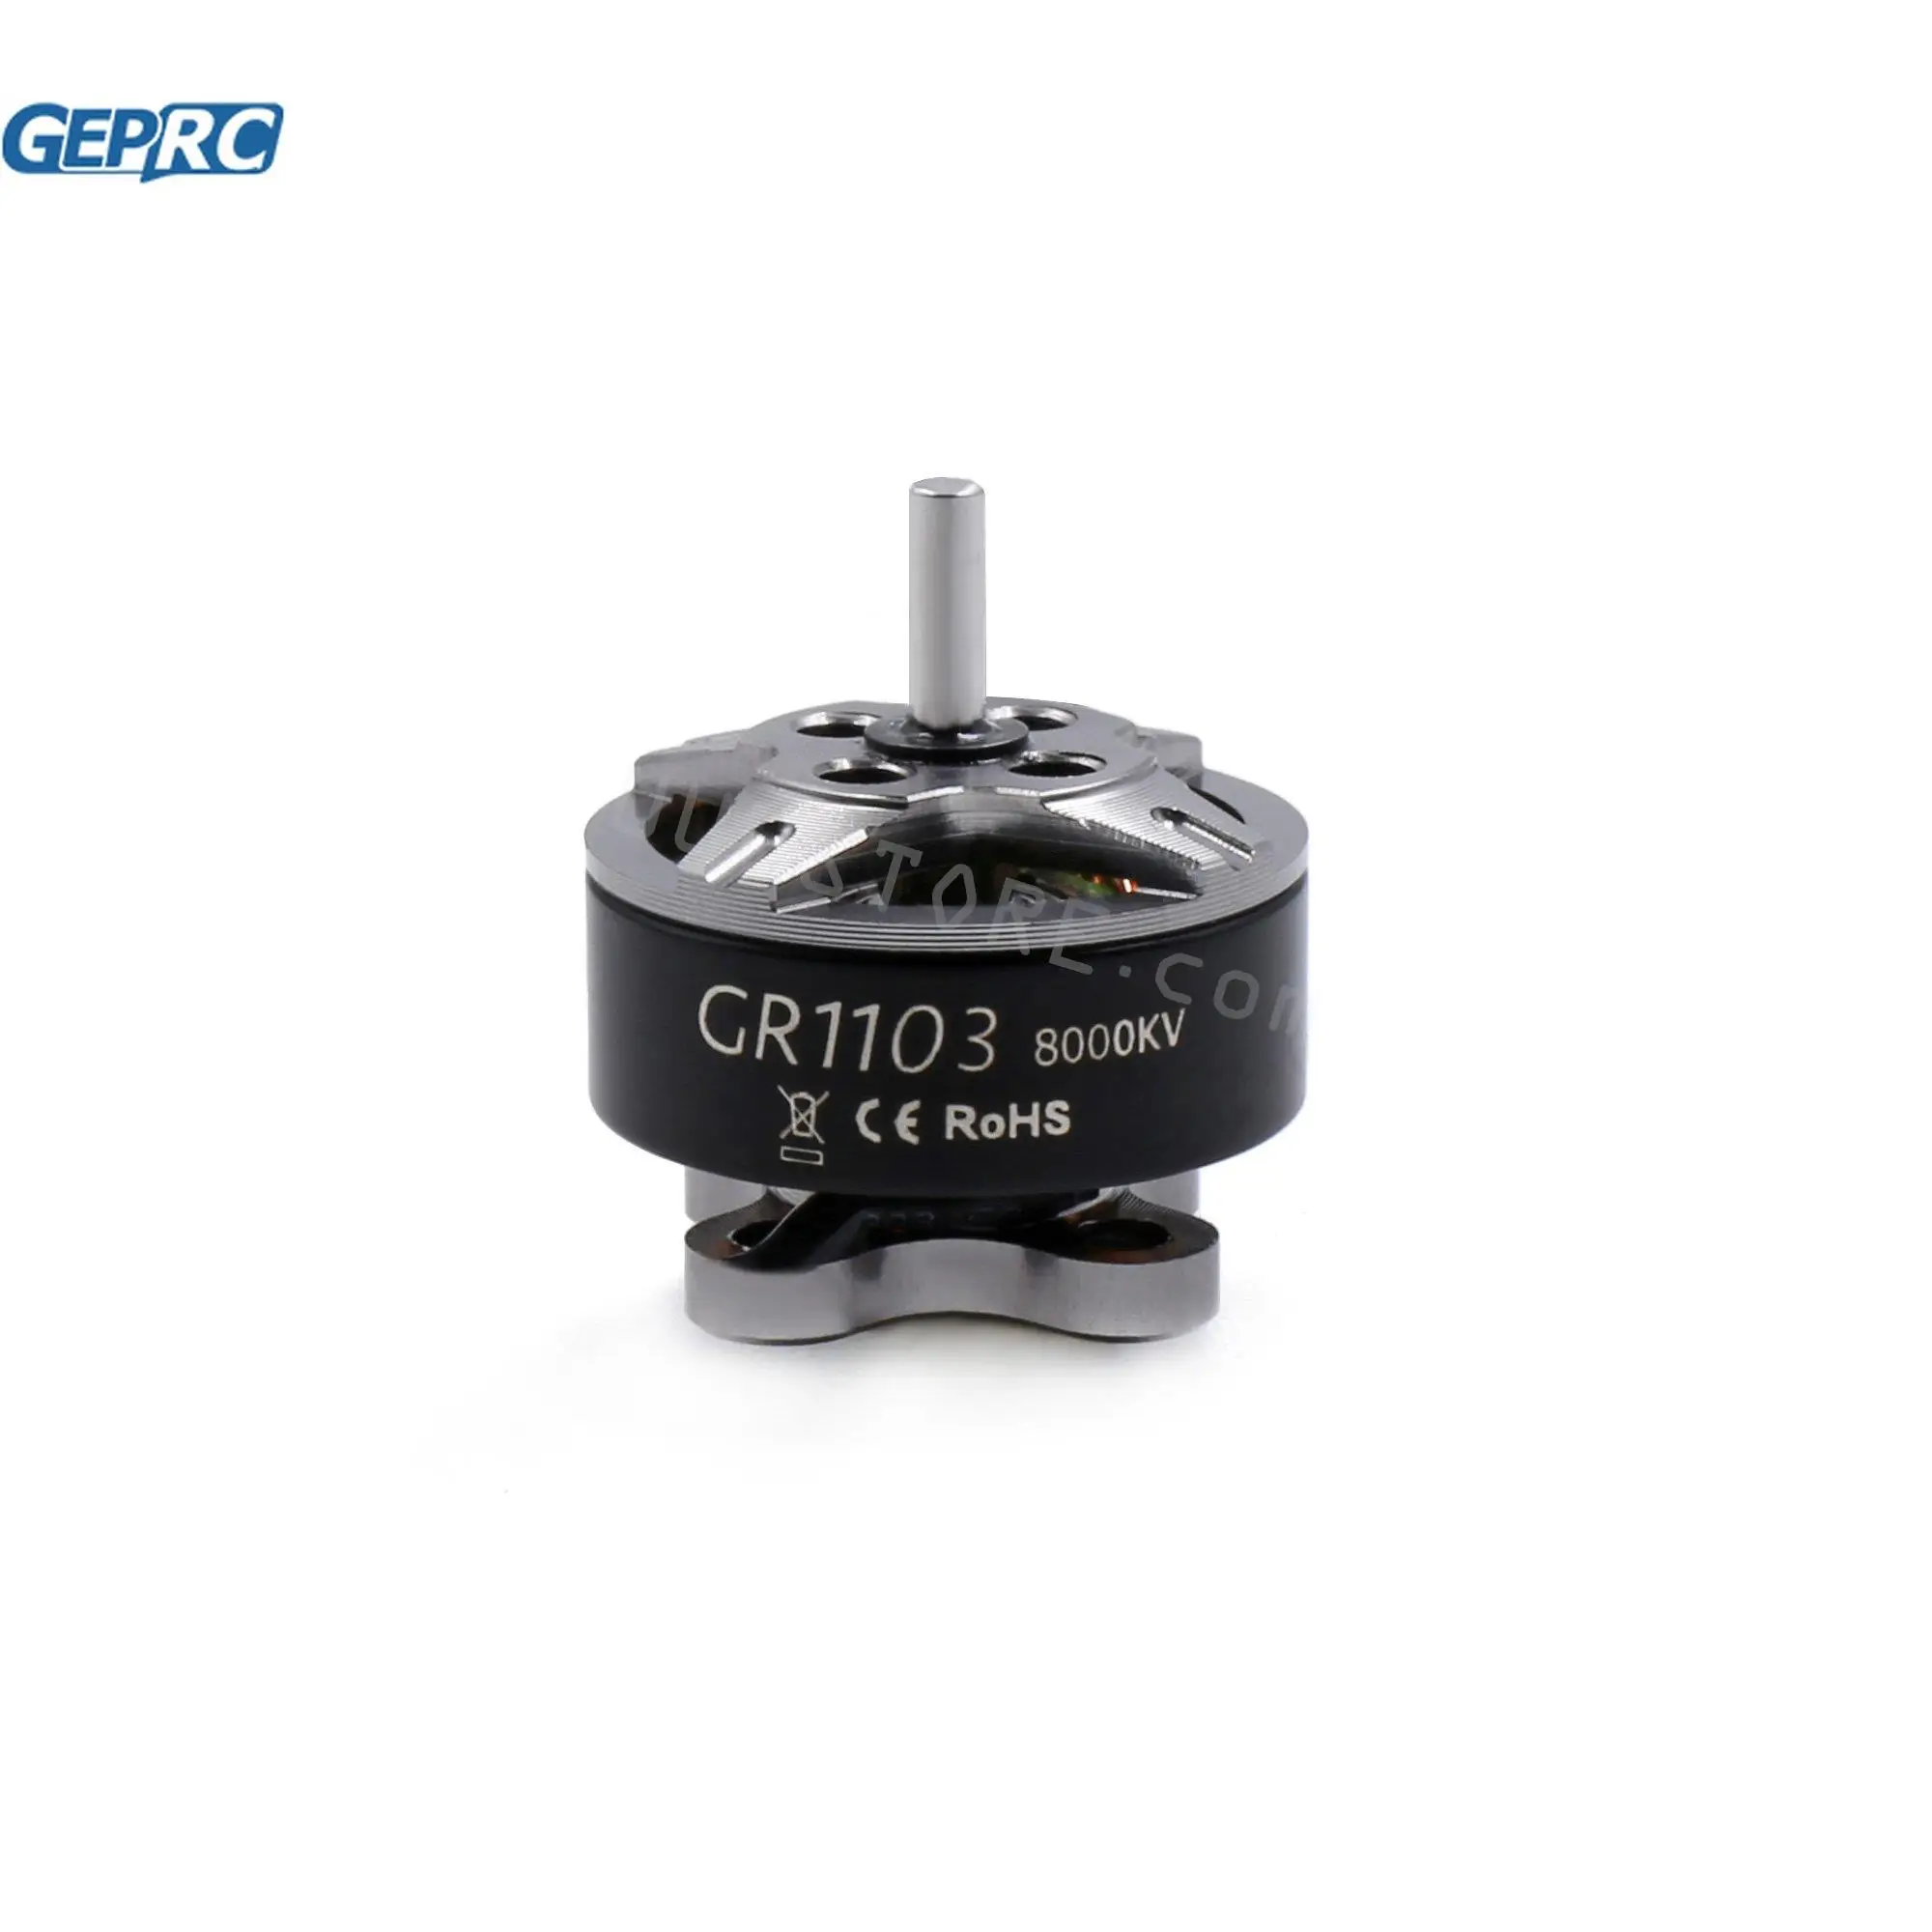 

GEPRC SPEEDX GR1103 8000KV 2-3S FPV Racing Brushless Motor for RC FPV Racing Freestyle Toothpick Tinywhoop Drones DIY Parts